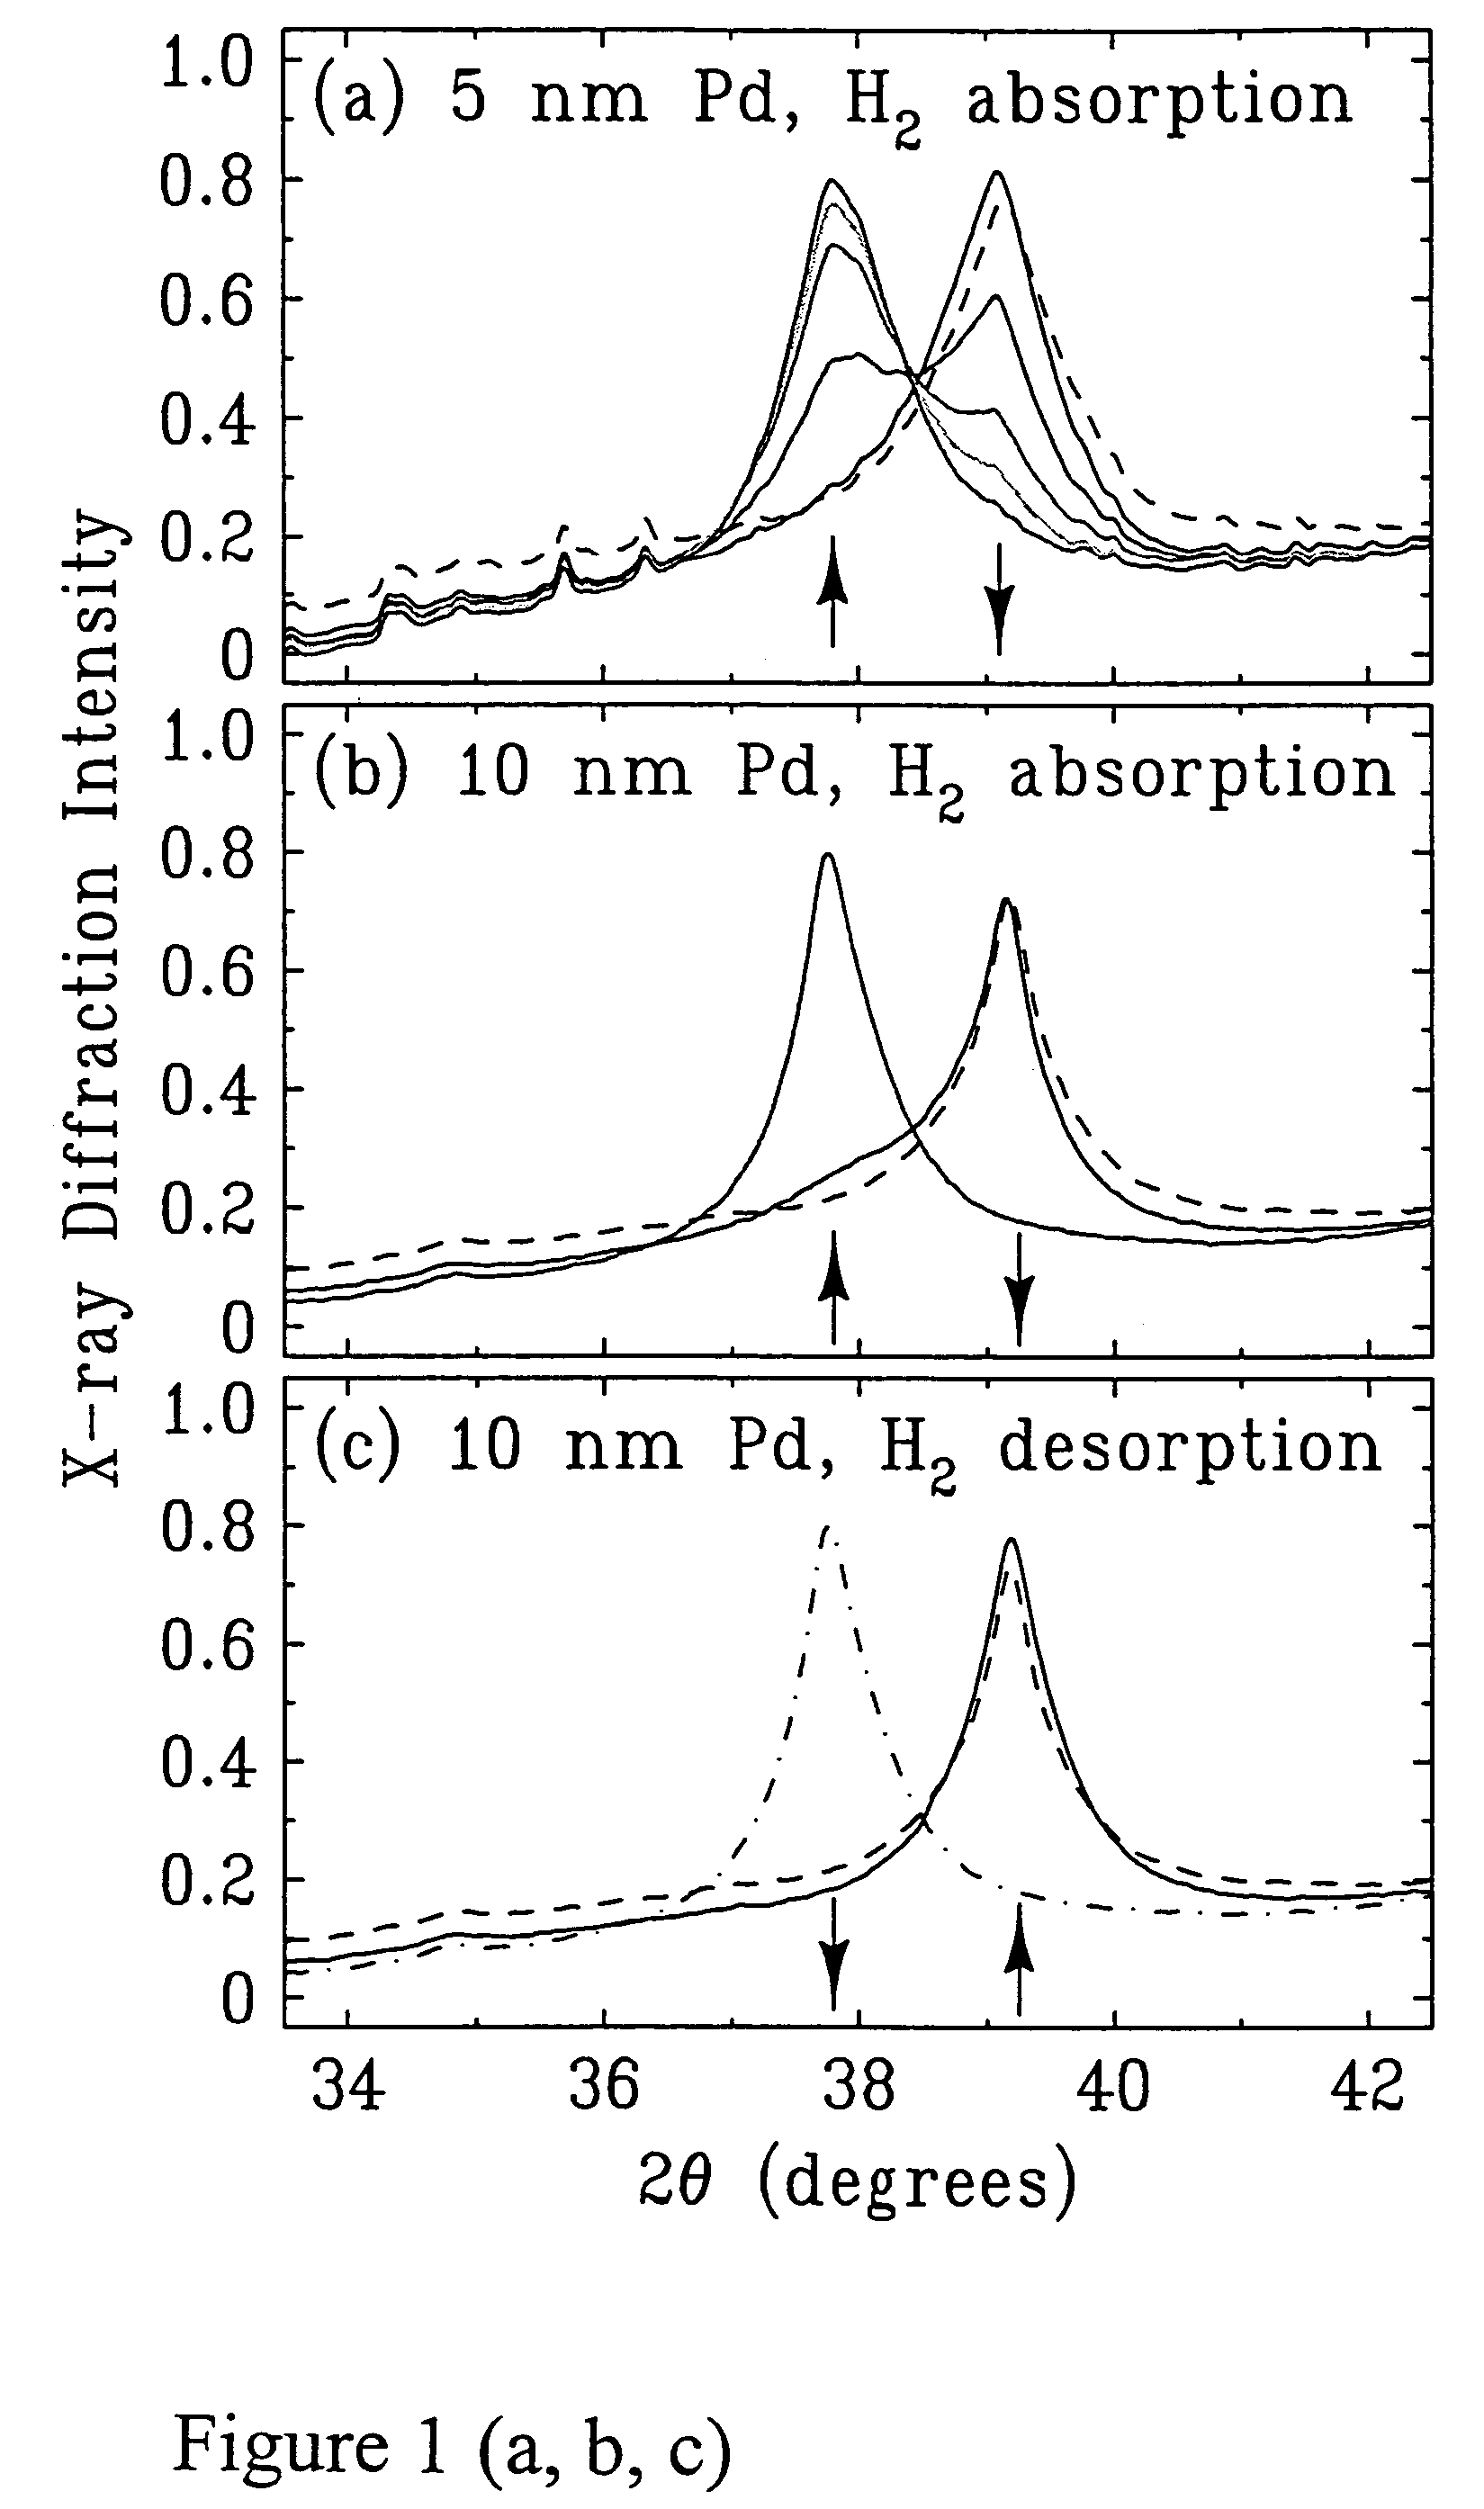 Hydrogen absorption induced metal deposition on palladium and palladium-alloy particles